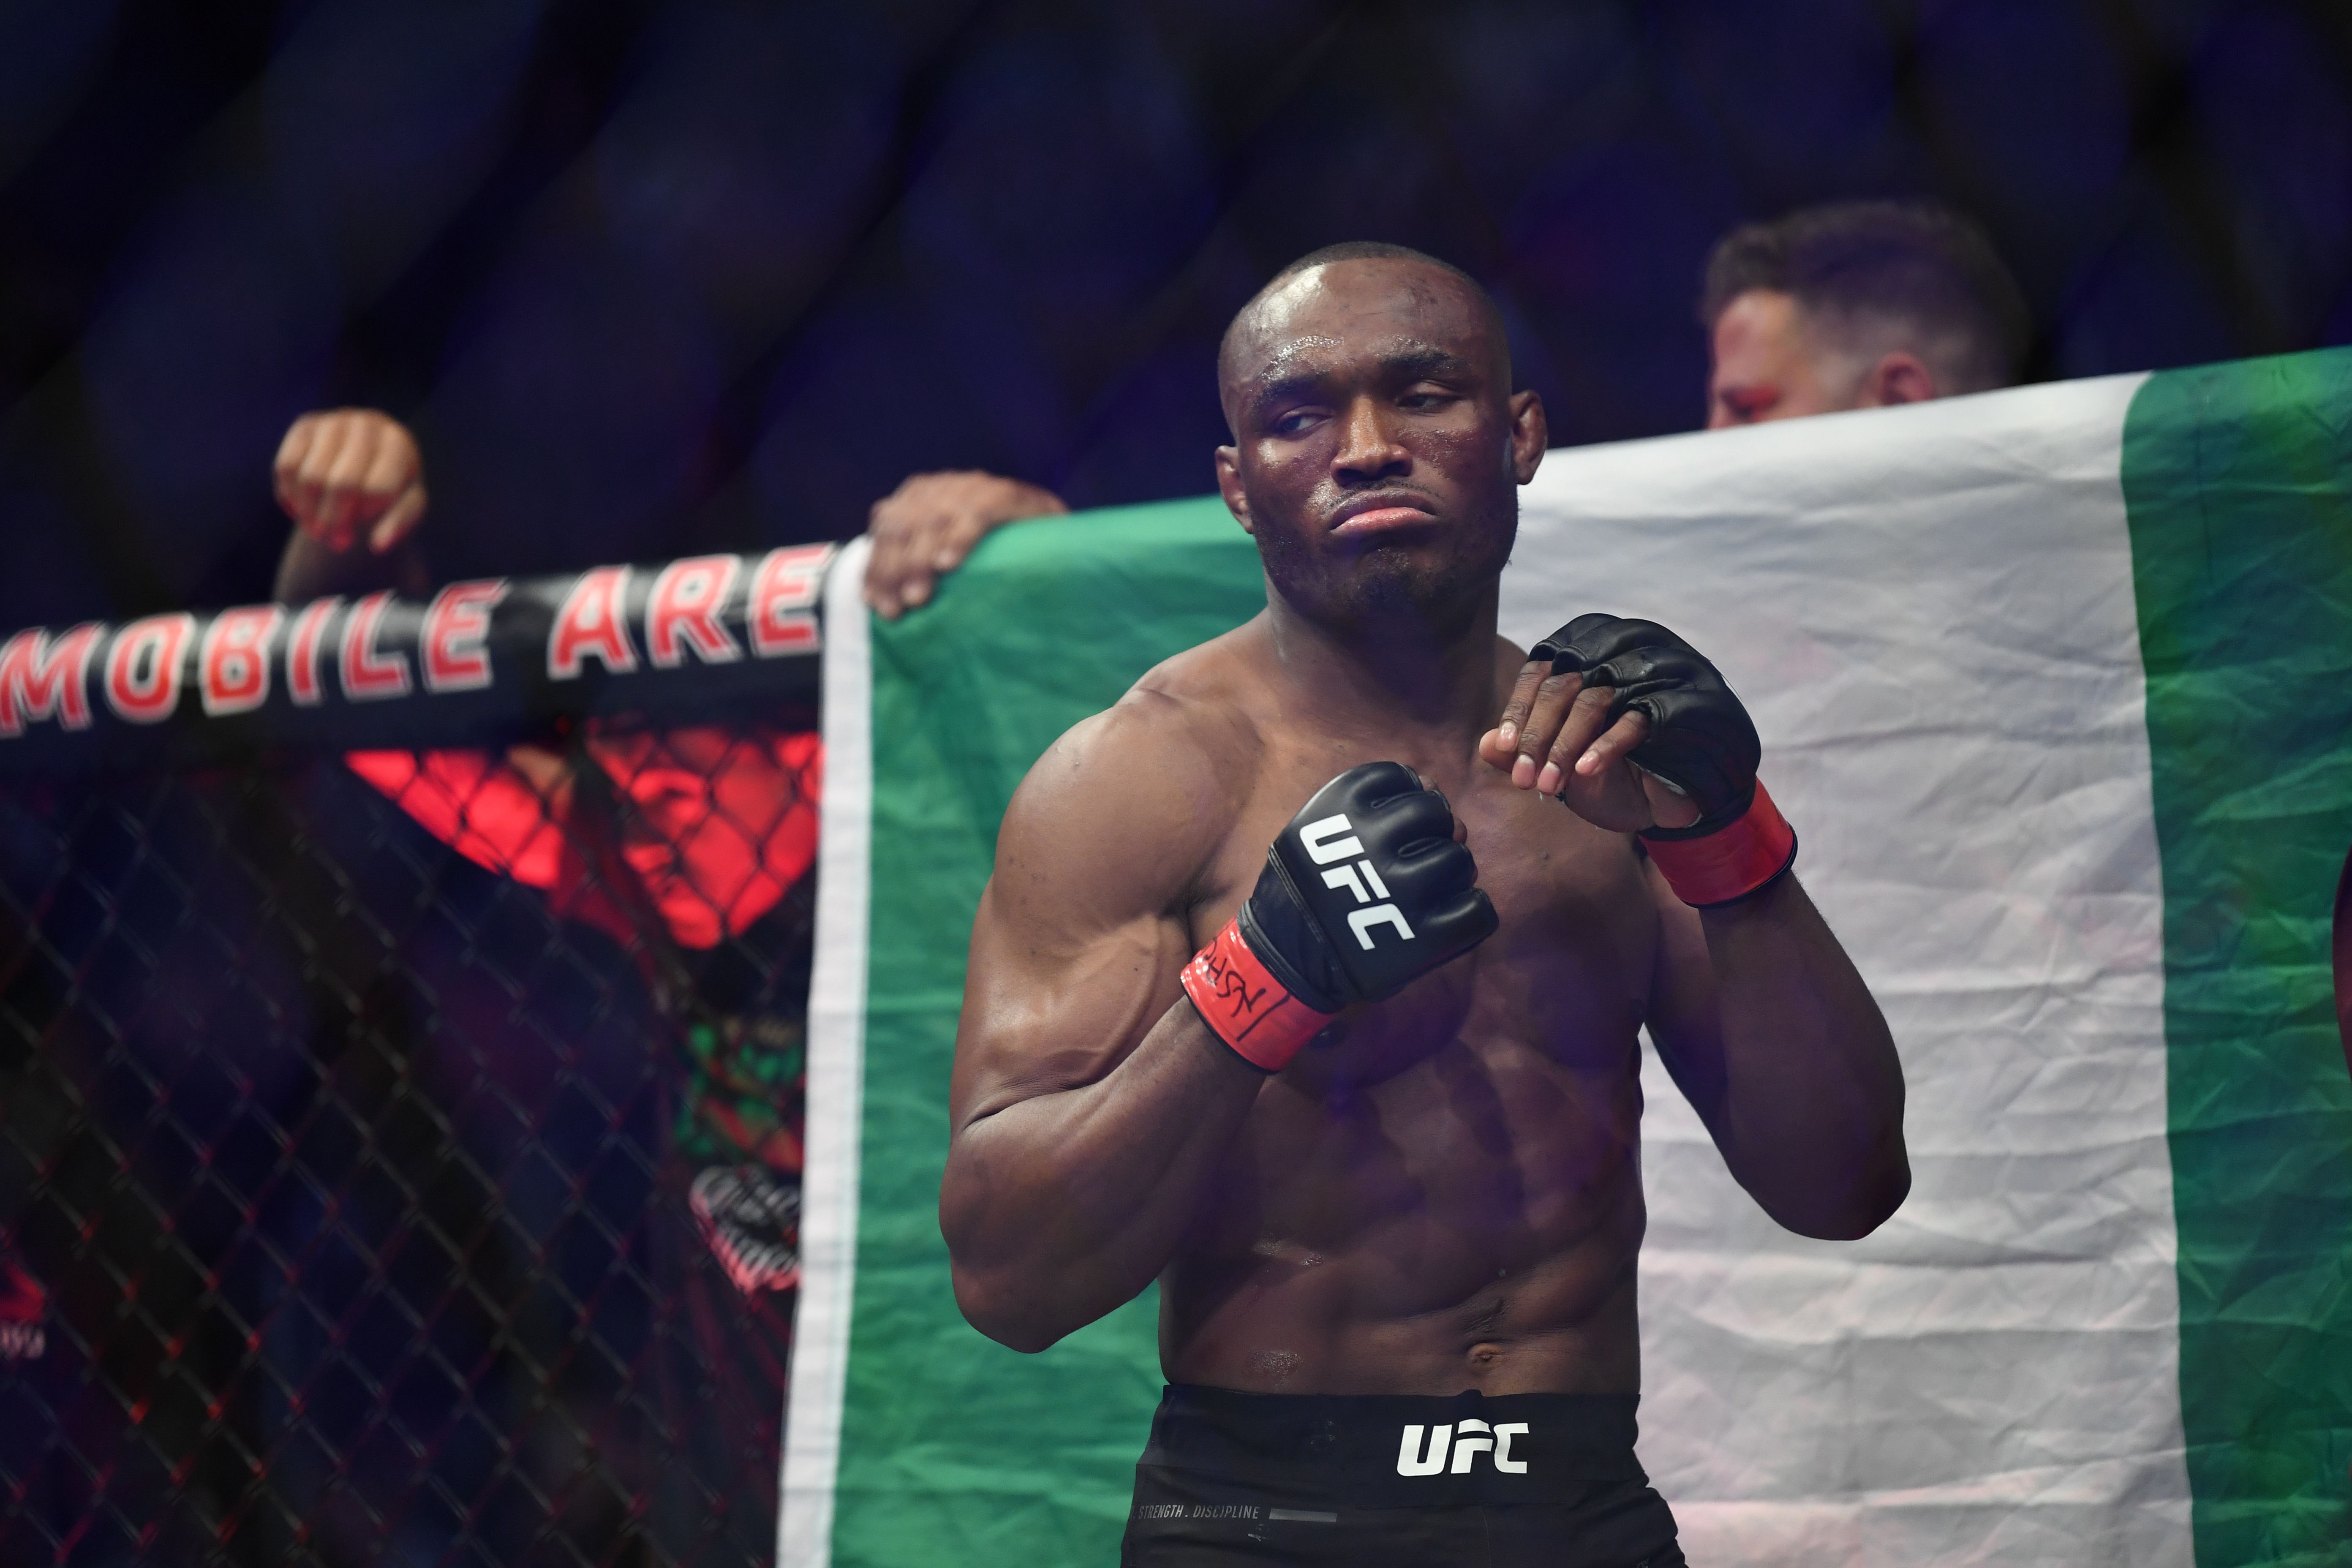 Kamaru Usman before his bout against Colby Covington at UFC 245. Photo: USA TODAY Sports